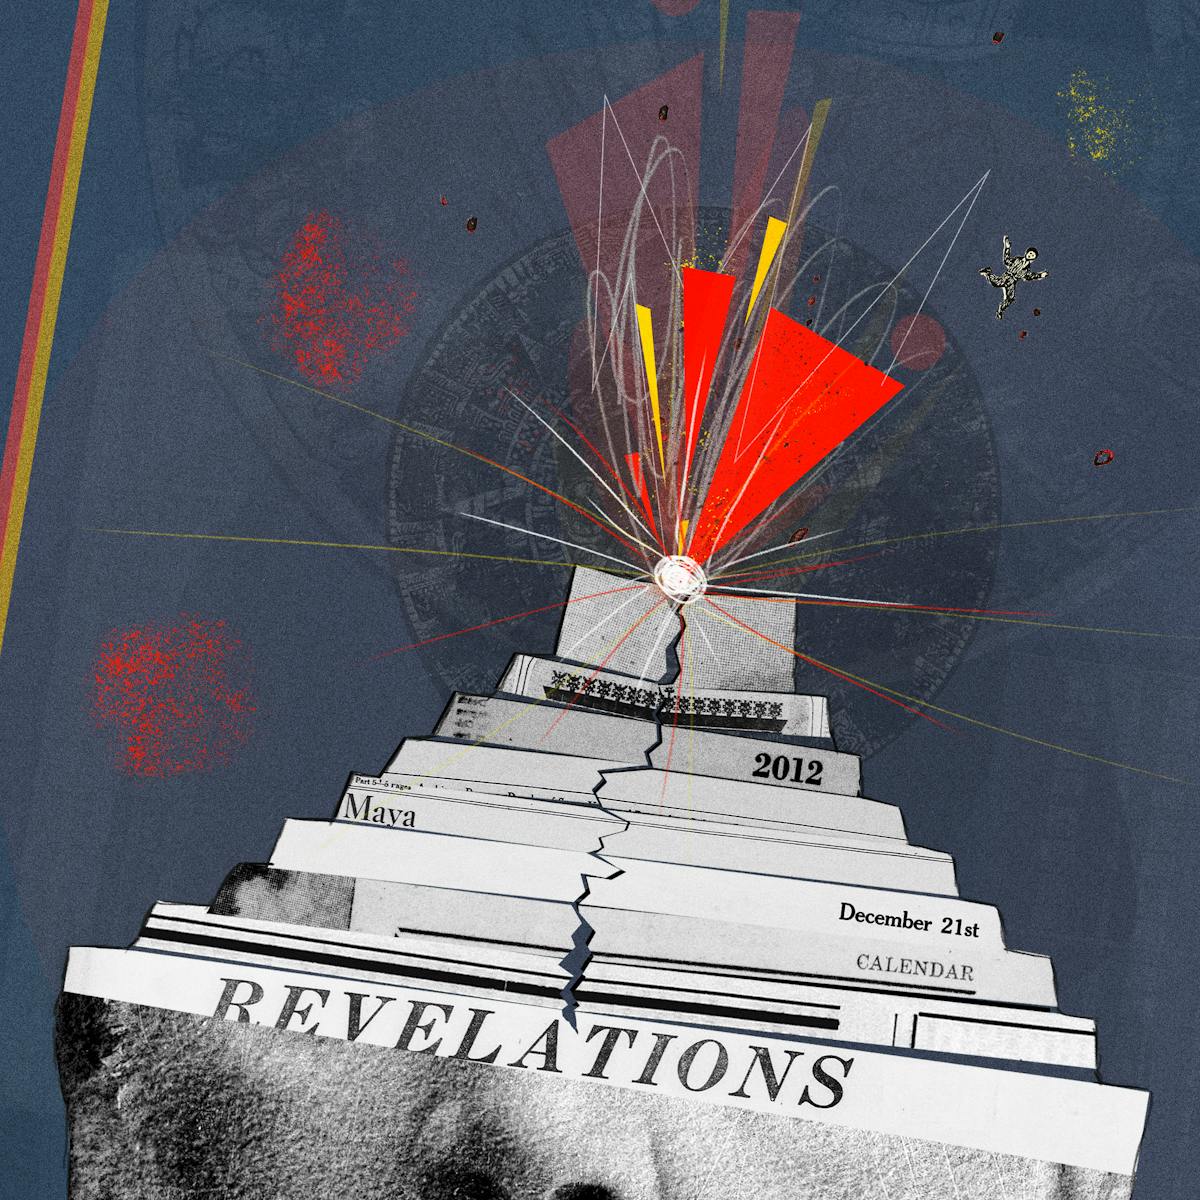 Mixed media digital artwork combining found imagery from vintage magazines and books with painted and textured elements. The overall hues are blues, yellows and reds. The illustration is split in two by a red and yellow line running vertically through the image at a slight angle. On the left side of this line is the black and white archive image od the head and upper body of a man with a white beard wearing a suit from the Victorian era. The top half of his head from his nose up has been replaced with strips of newspapers arranged in a step formation to resemble a Mayan temple. The first level of newspaper has the word 'Revelations' in all caps. As the levels rise the words, 'calendar', December 21st', 'Maya' and '2012' appear in newspaper print. At the top of the temple structure is a bright light and an explosion of red and yellow wedges shooting up into the blue background. A large crack runs down through the temple. On the right side of the vertical lines, the image of this temple structure is duplicated and enlarged to reveal it in more detail and crop out the man's lower head. A small figure can now be seen flying through the air, propelled by the force of the explosion.